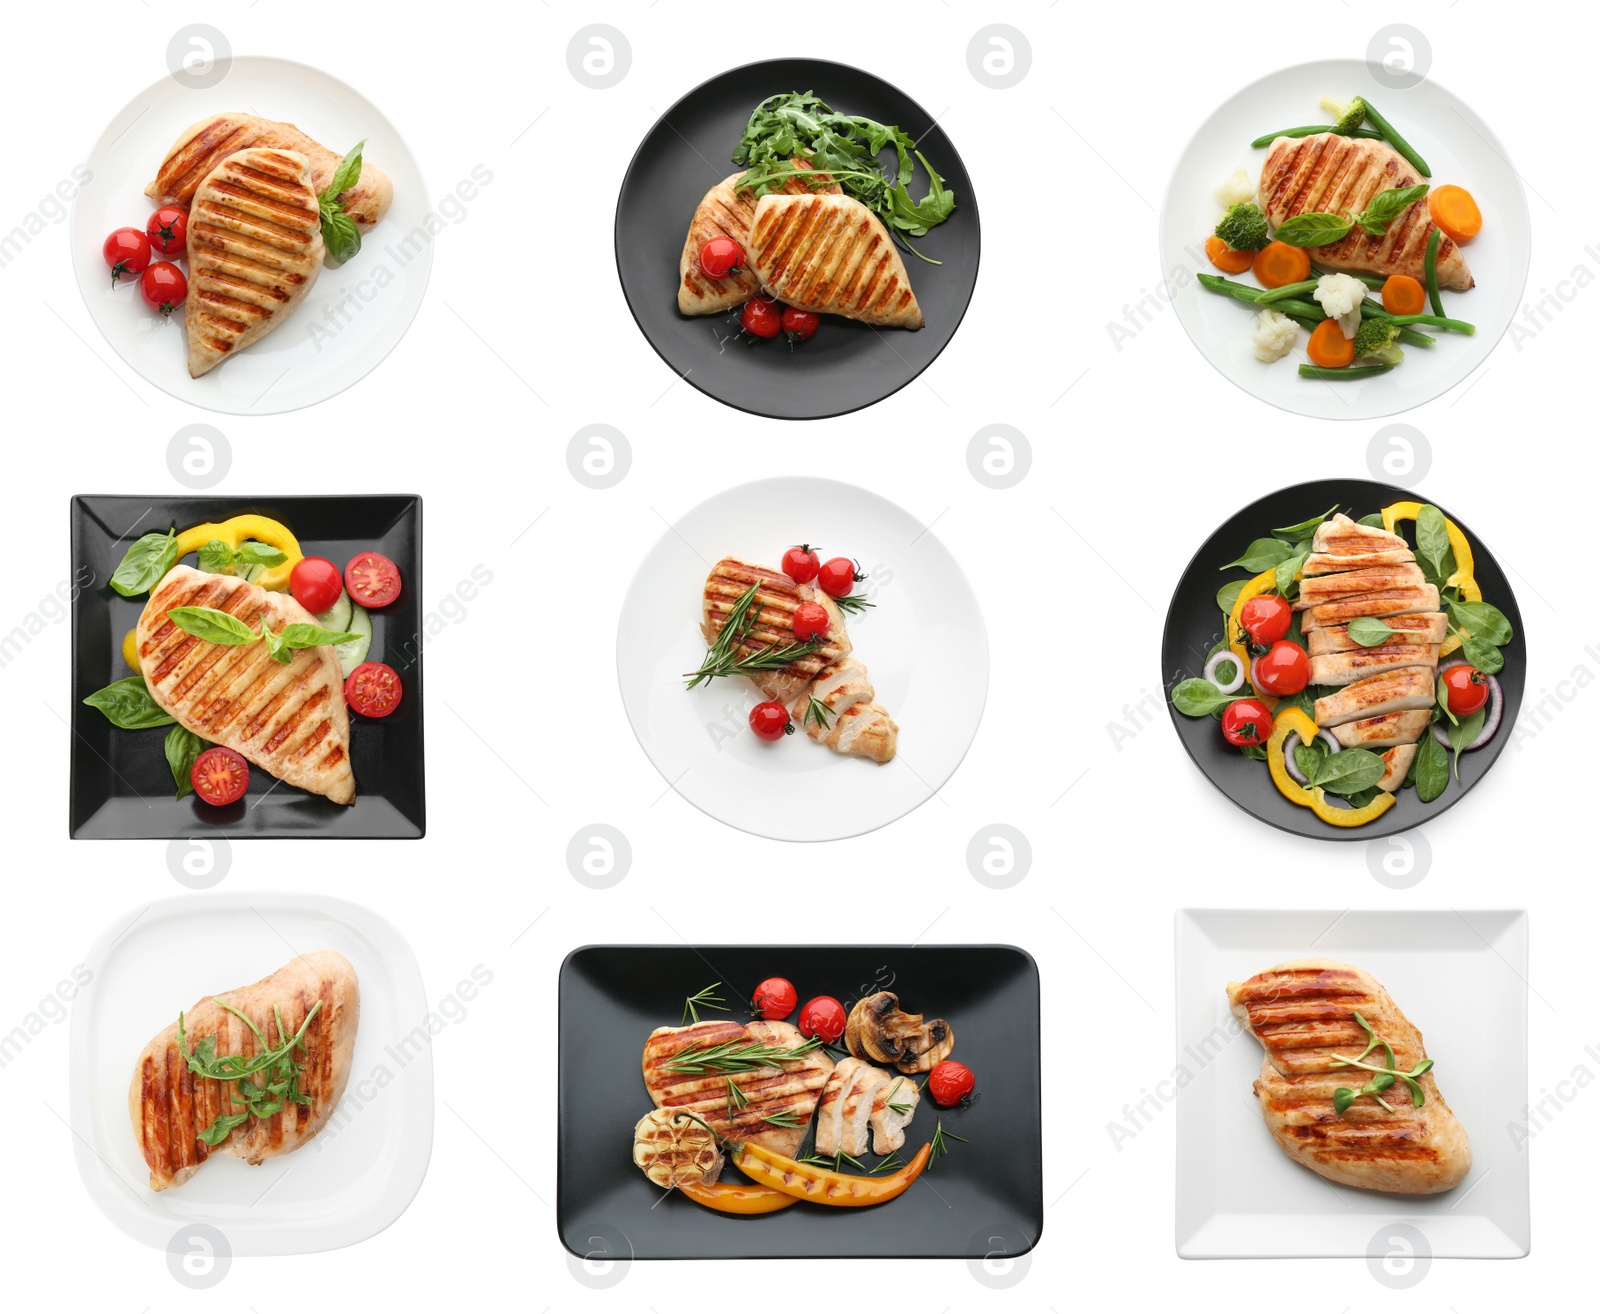 Image of Set of grilled chicken breasts on white background